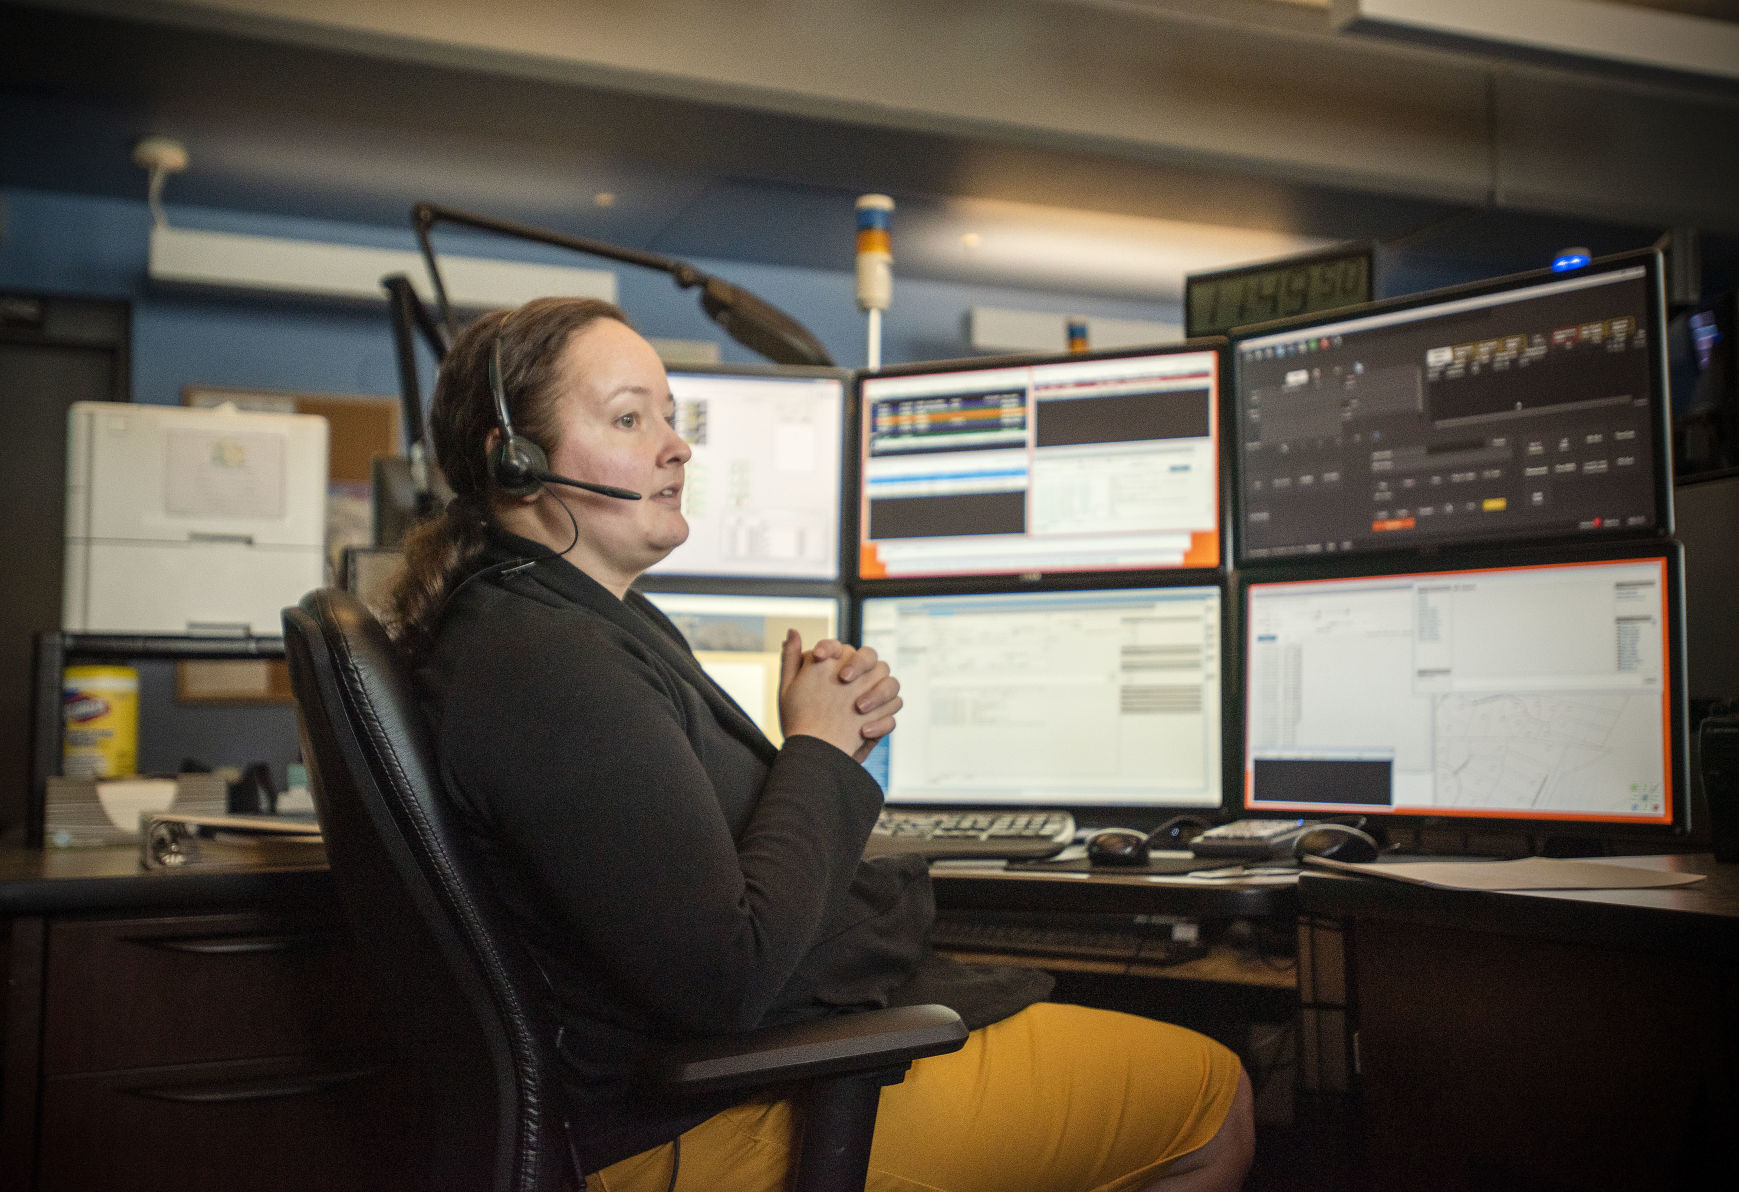 Behind the Headline: ‘911 Calls for Help as Dispatcher Staff Shrinks’